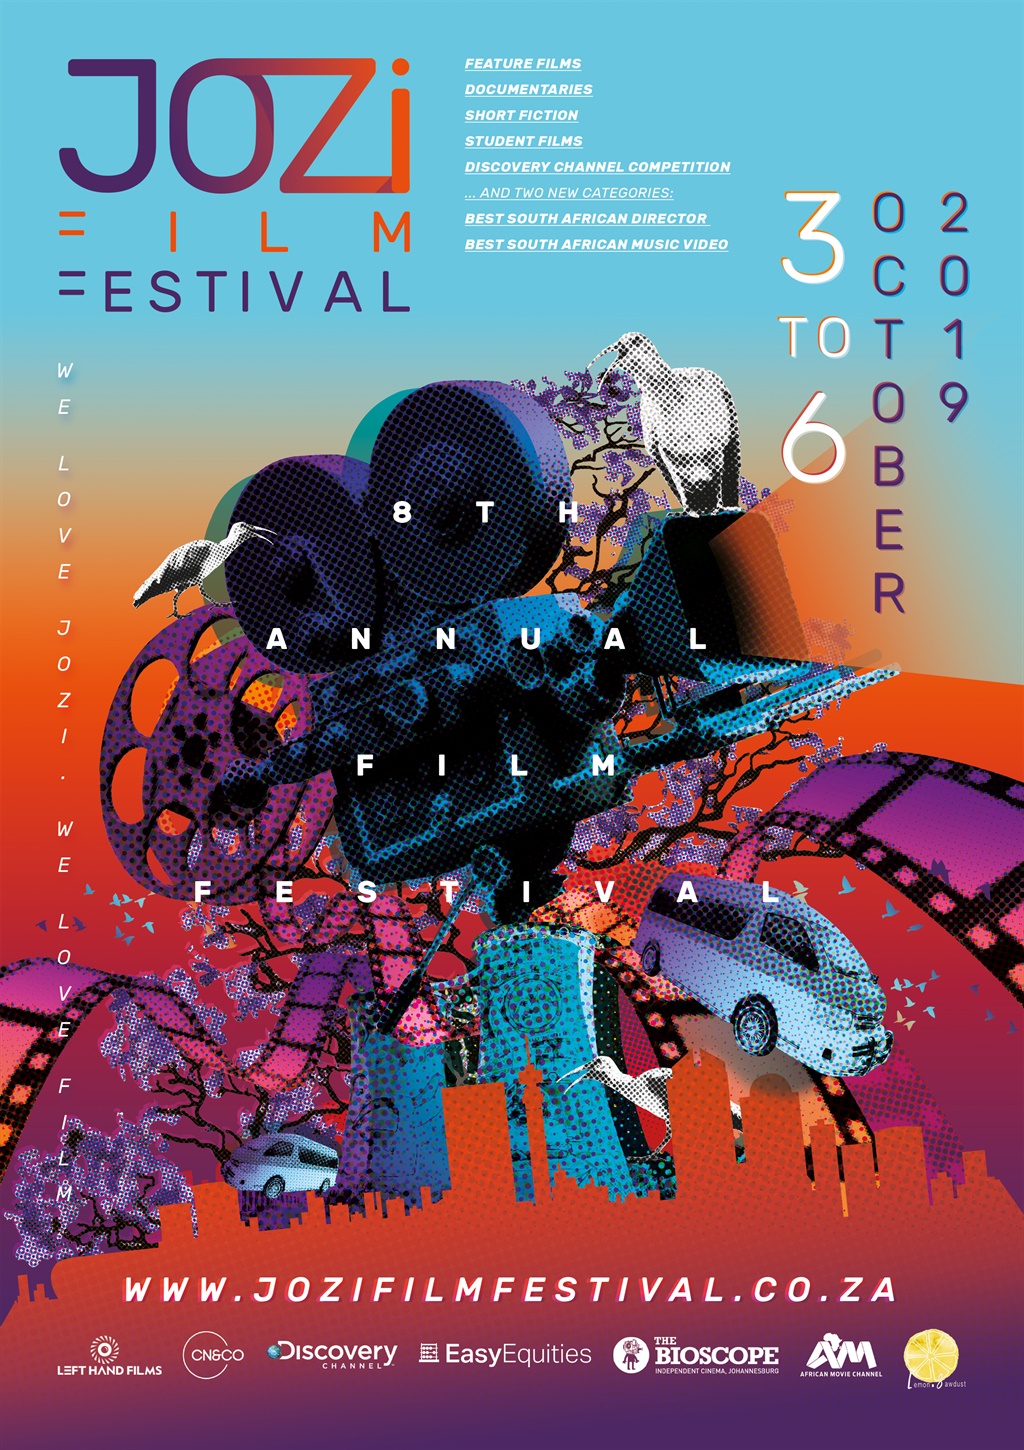 The mustsees at this year’s Jozi Film Festival City Press